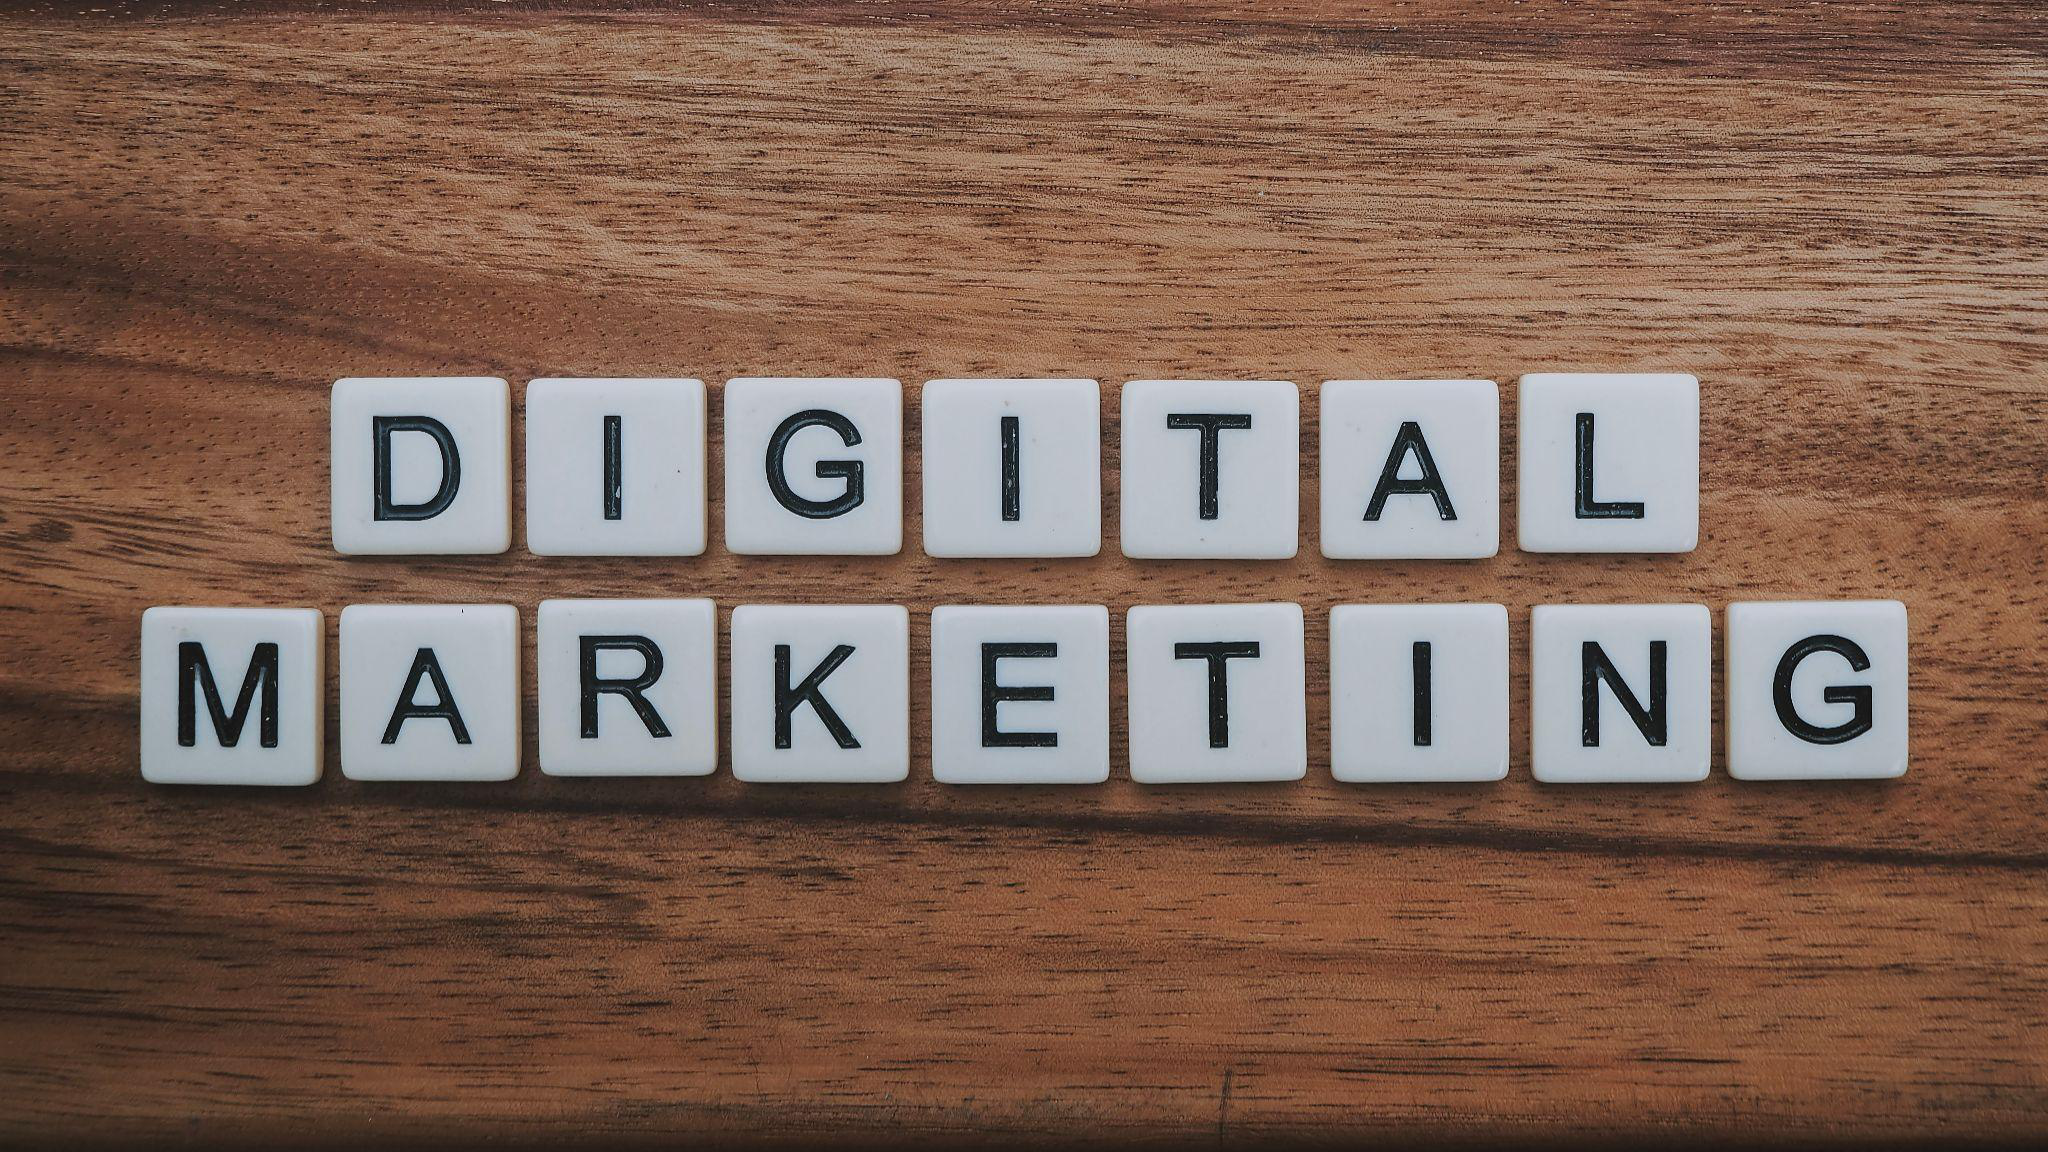 Know the best digital marketing practices of 2023